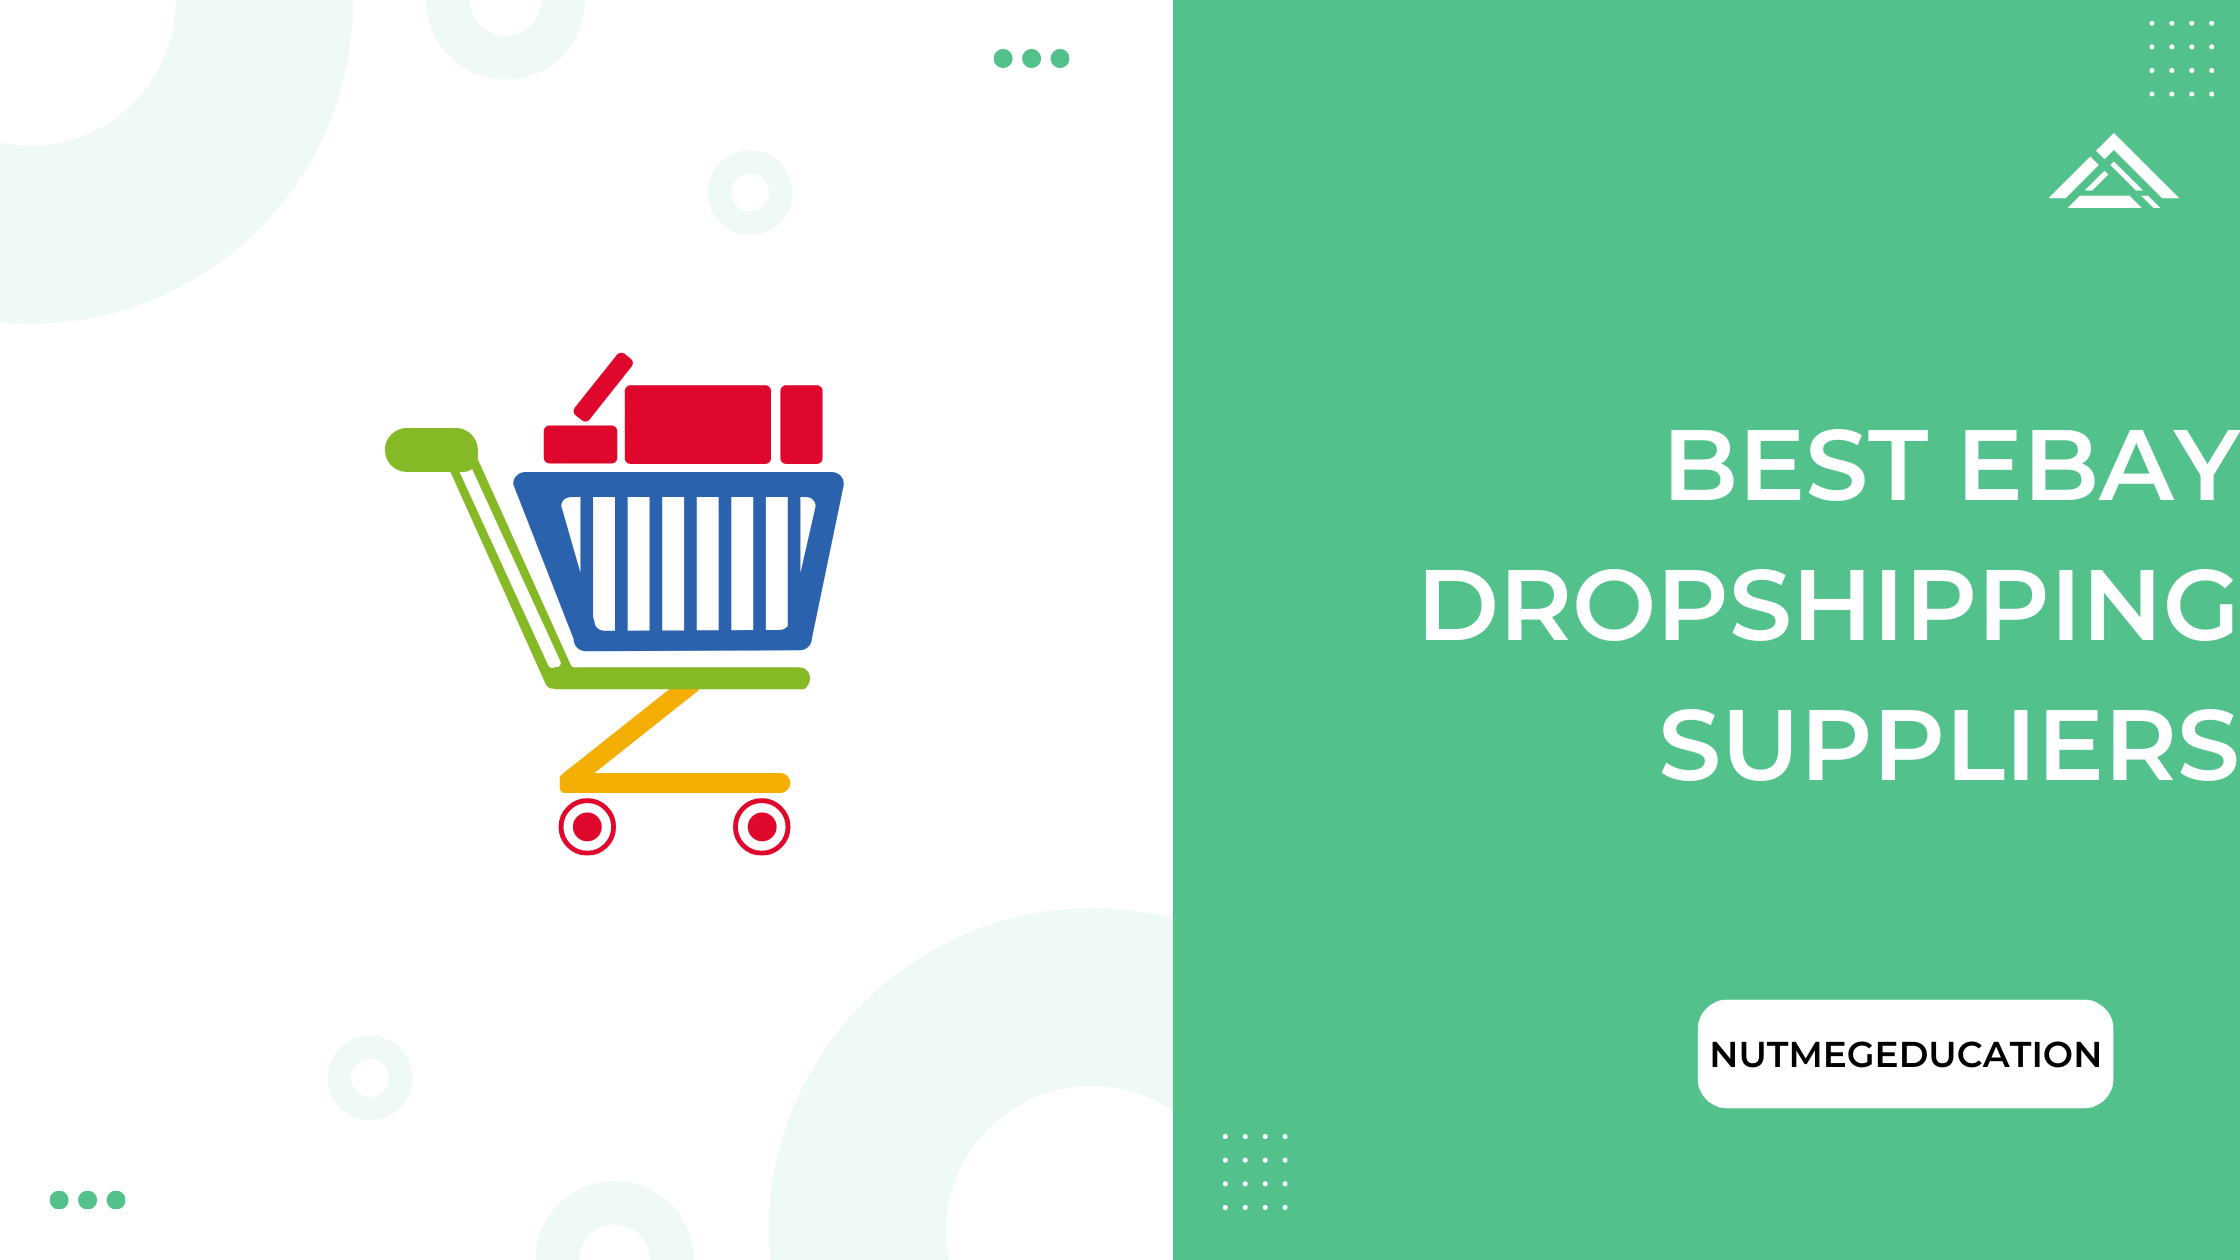 Best eBay Dropshipping Suppliers - GrowthDevil